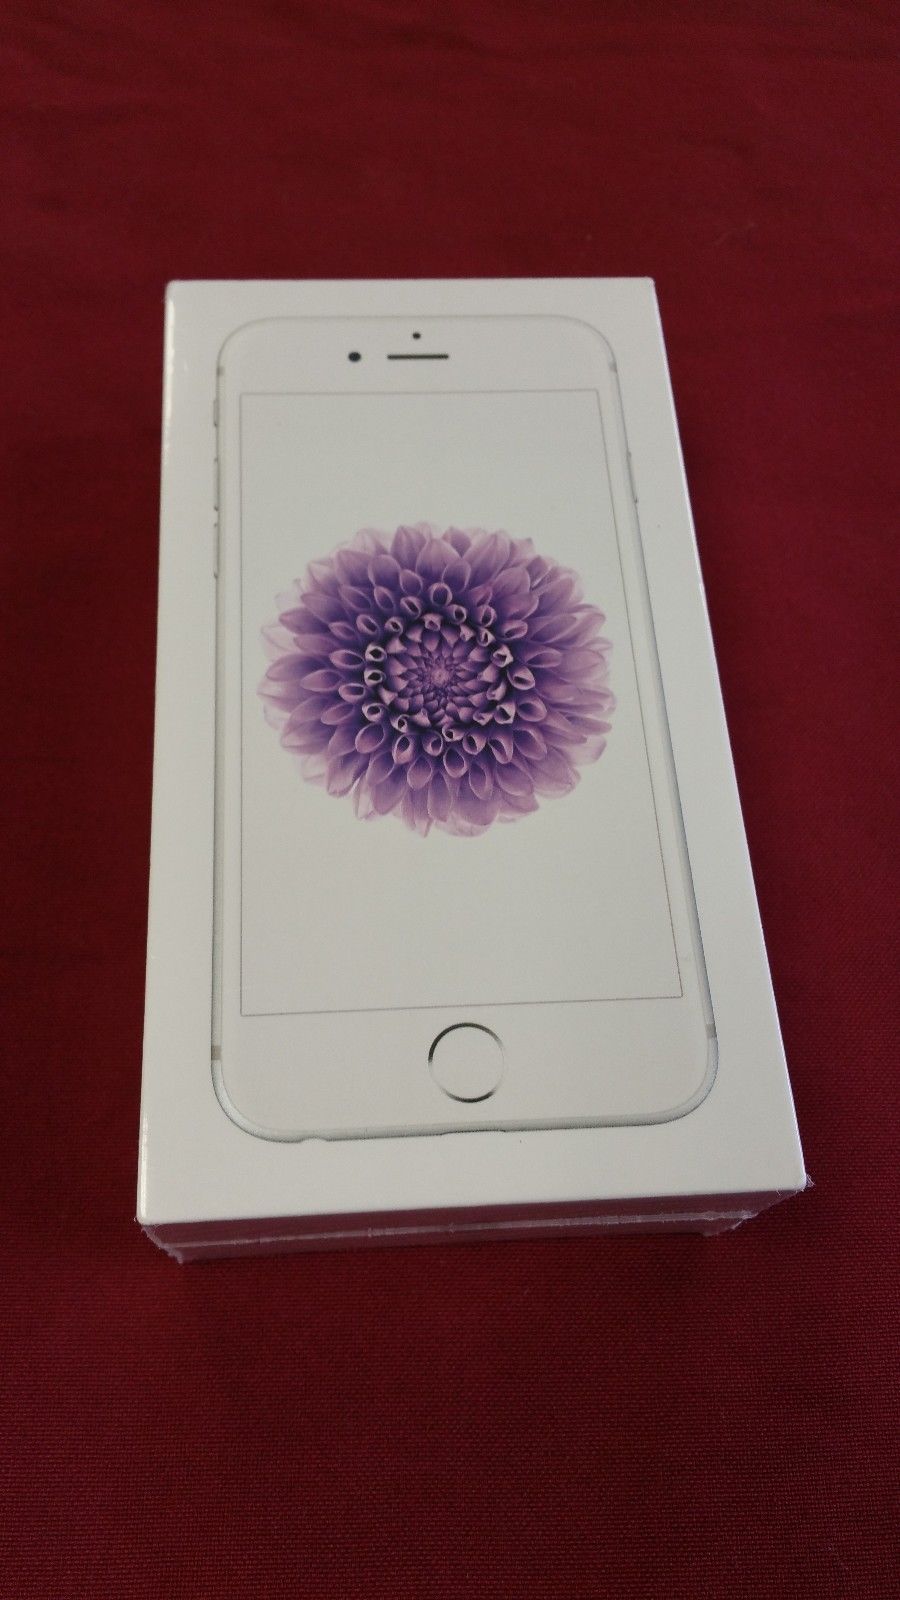 Apple iPhone 6 - 16GB - Silver  Smartphone Brand New Sealed